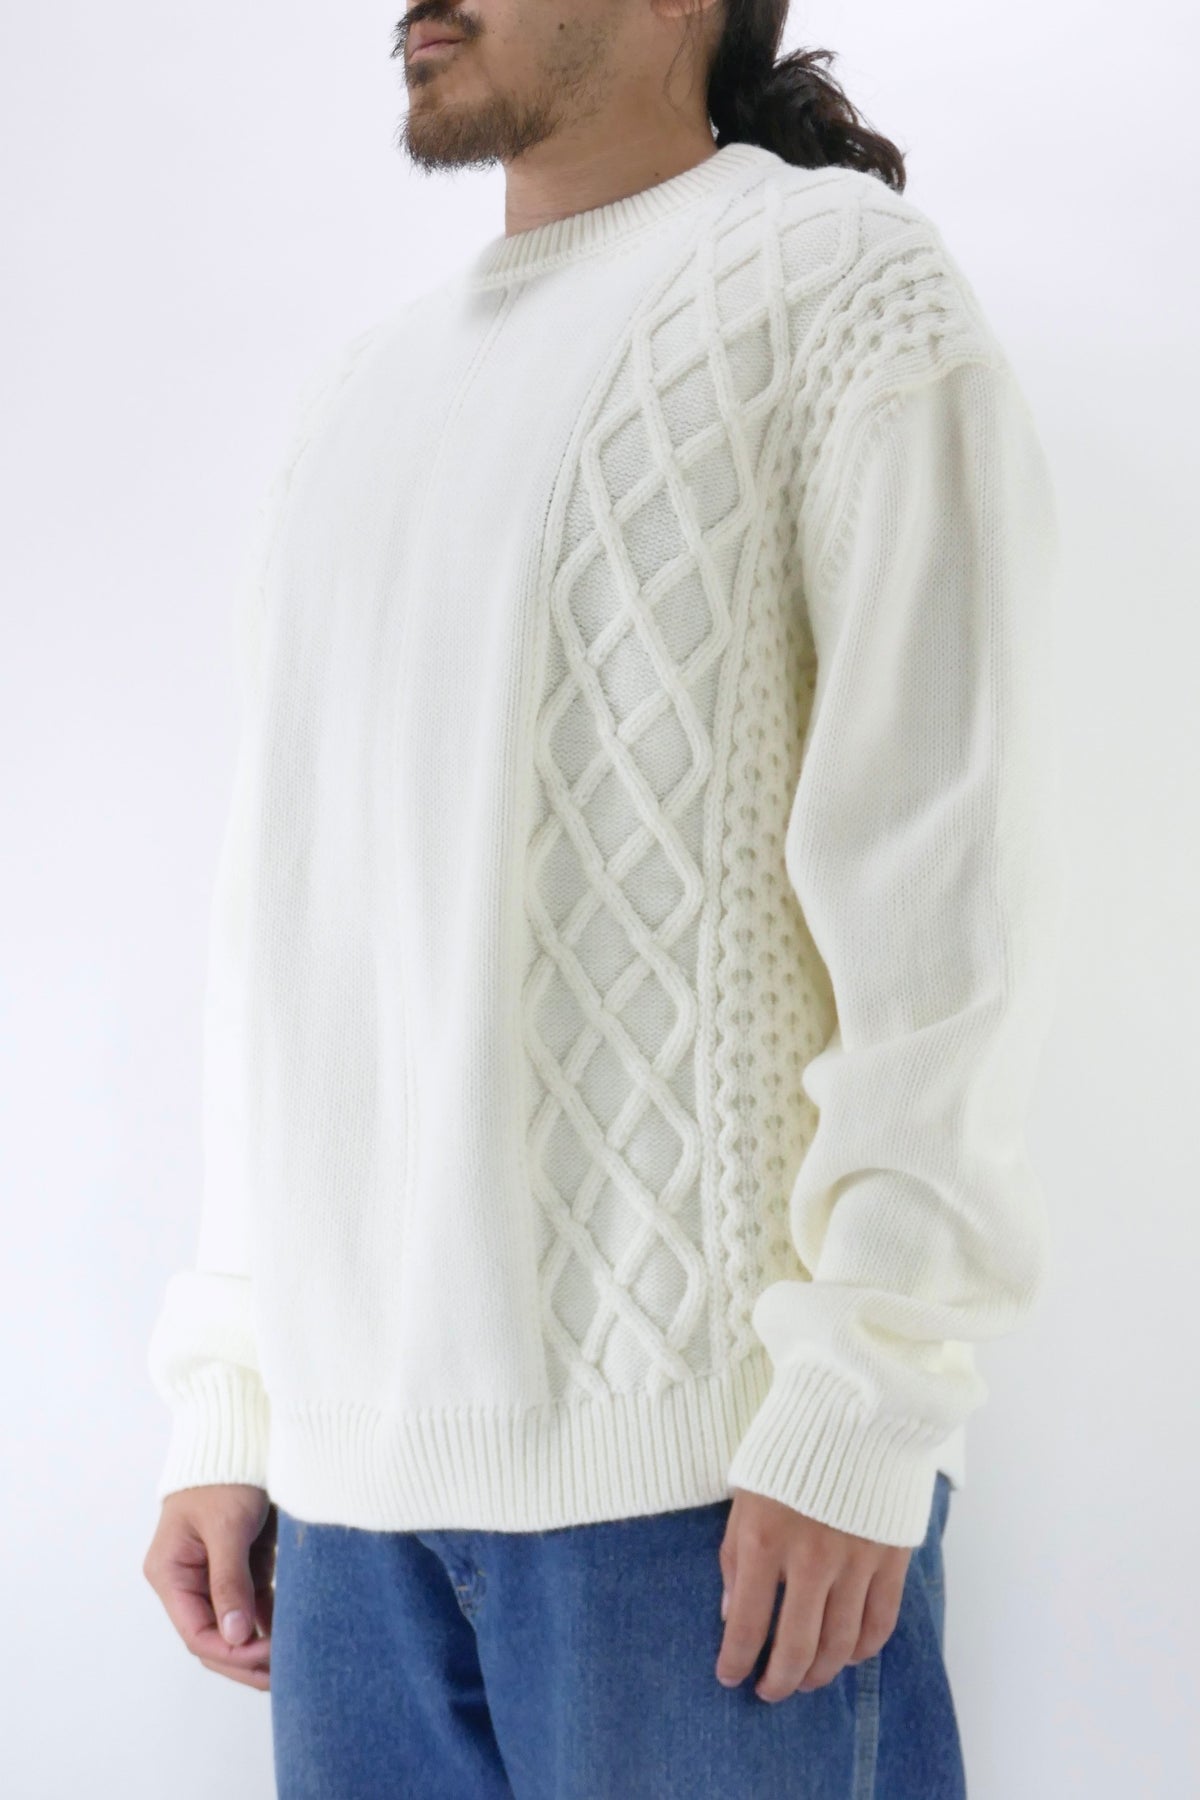 Family First Braided Crewneck Sweater - White